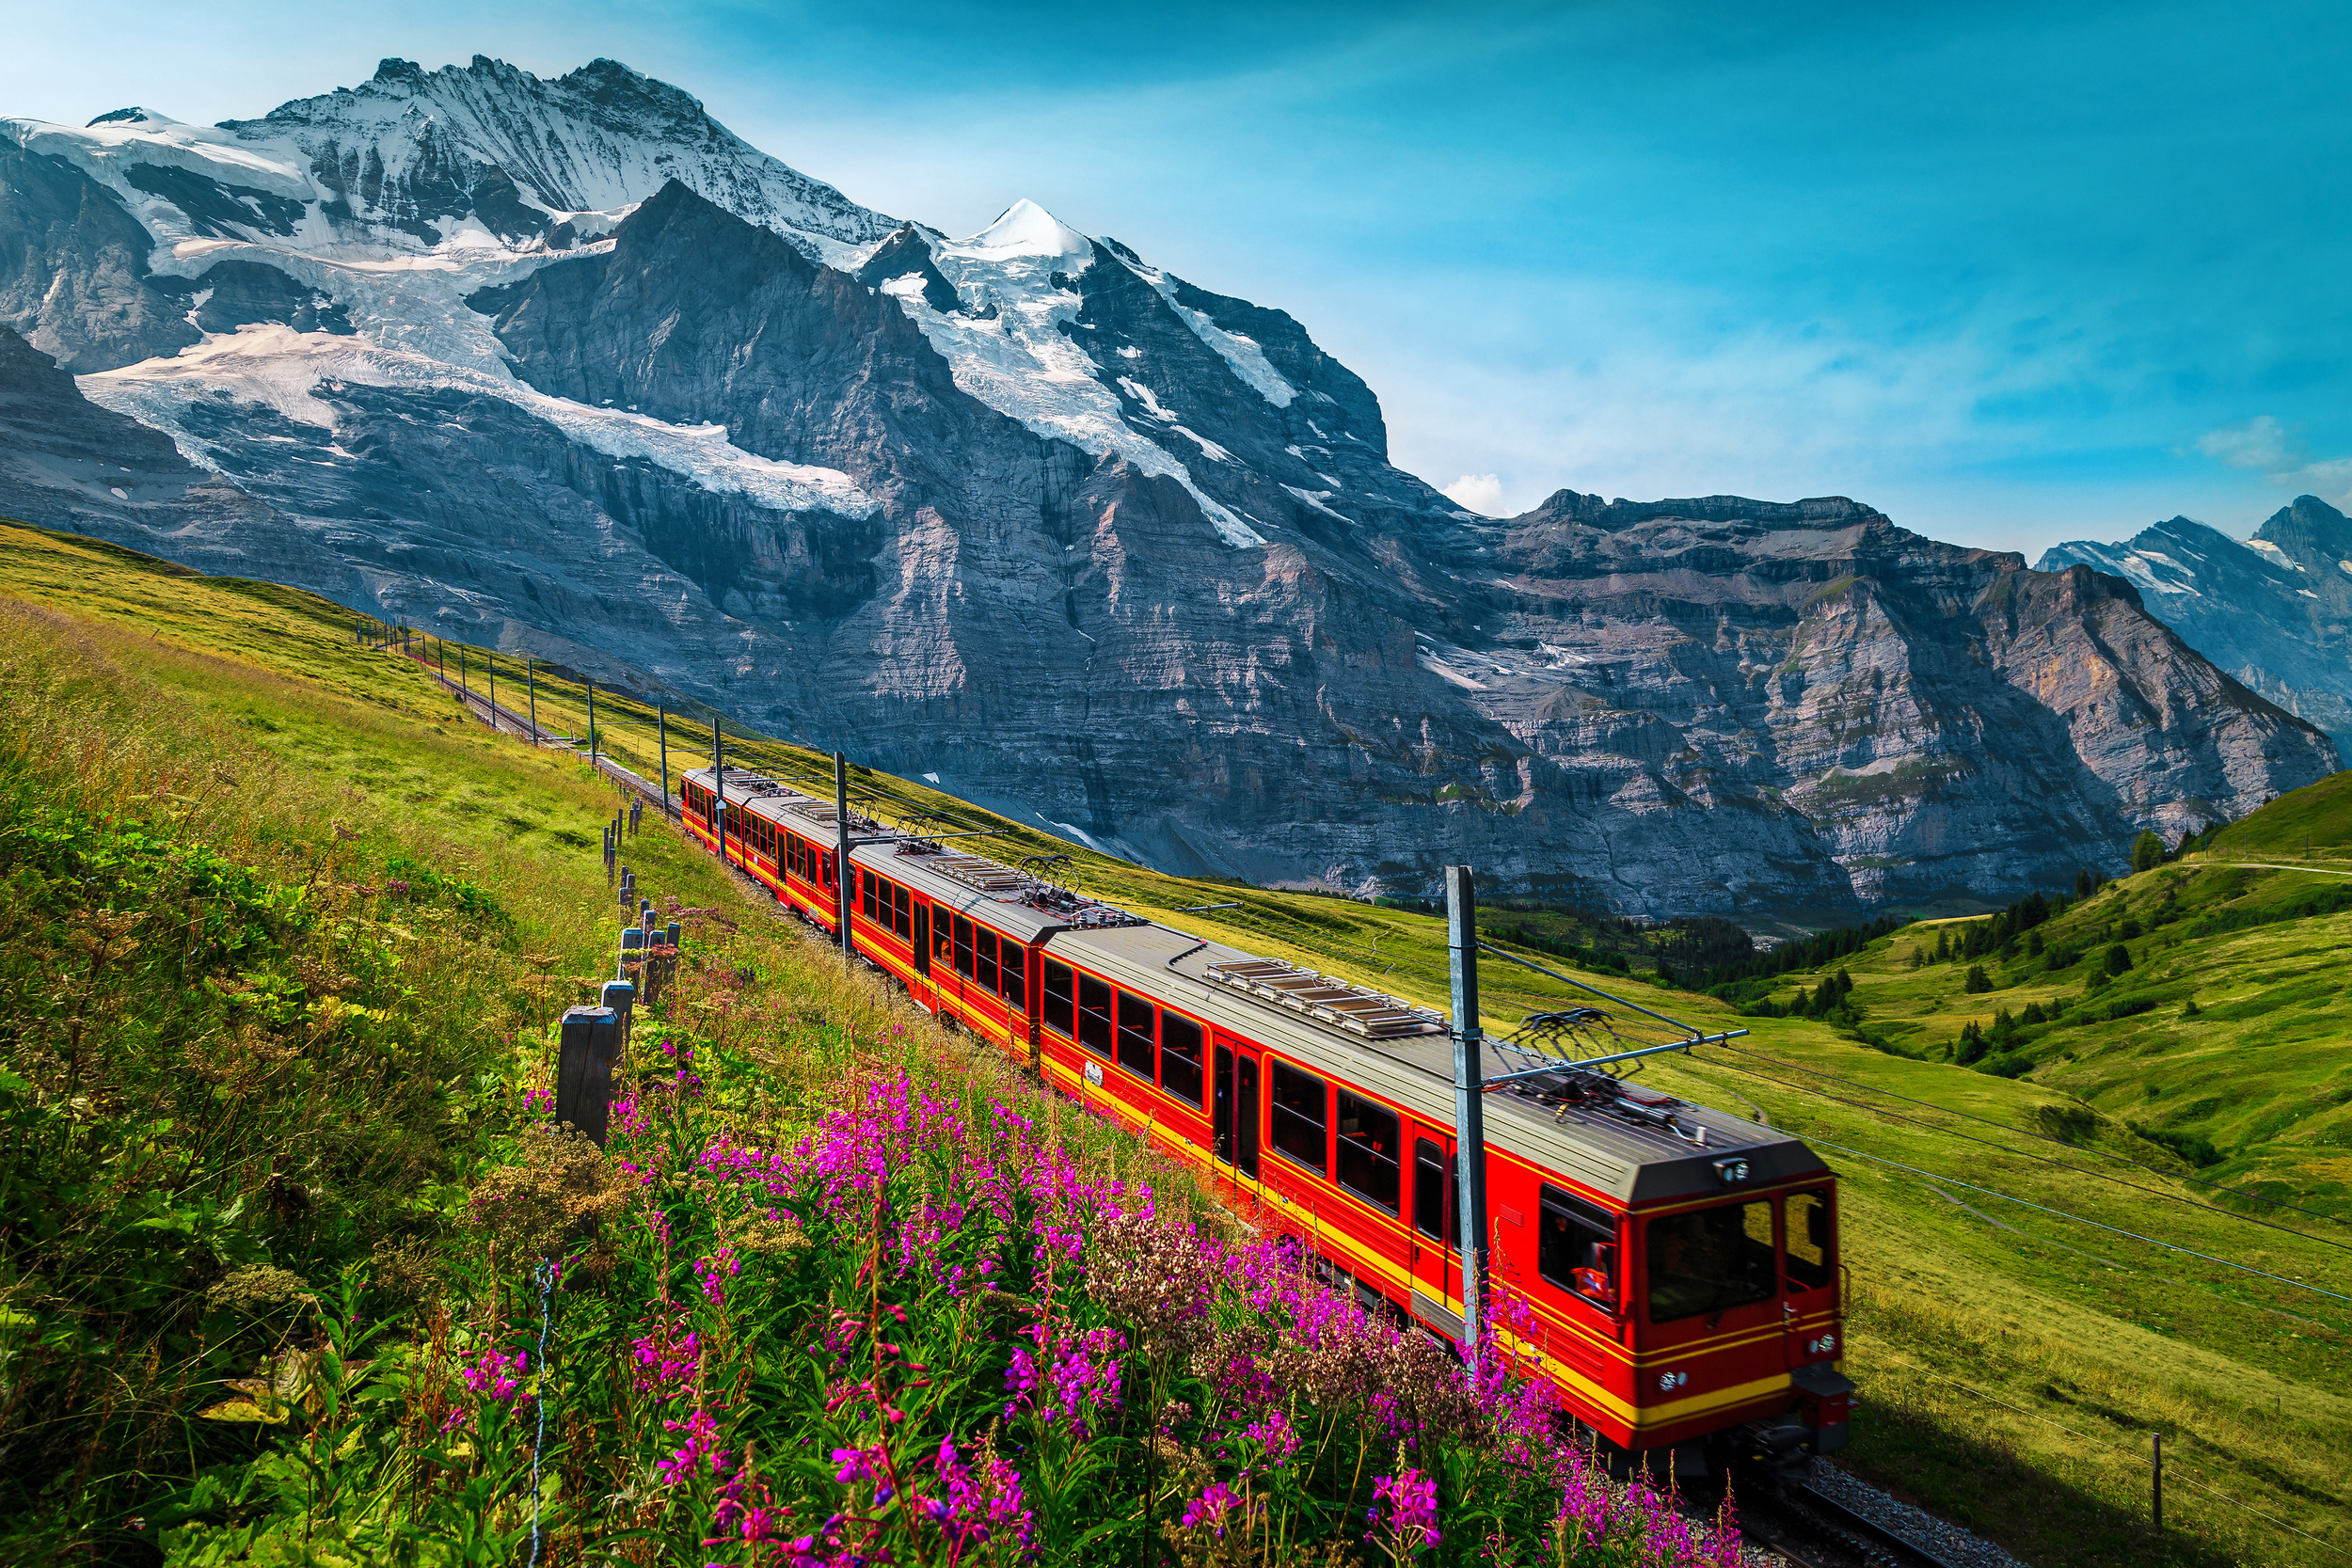 <p>This isn’t a standard commuter rail between two domestic cities; it’s an experience. The two-hour ride will take passengers through the lovely Swiss countryside. Before departing, you’ll see alpine blue lakes, cascading waterfalls, and quaint mountain villages.</p><p>You may also like: <a href='https://www.yardbarker.com/lifestyle/articles/25_places_other_than_france_where_speaking_french_is_helpful_031524/s1__38974299'>25 places other than France where speaking French is helpful</a></p>